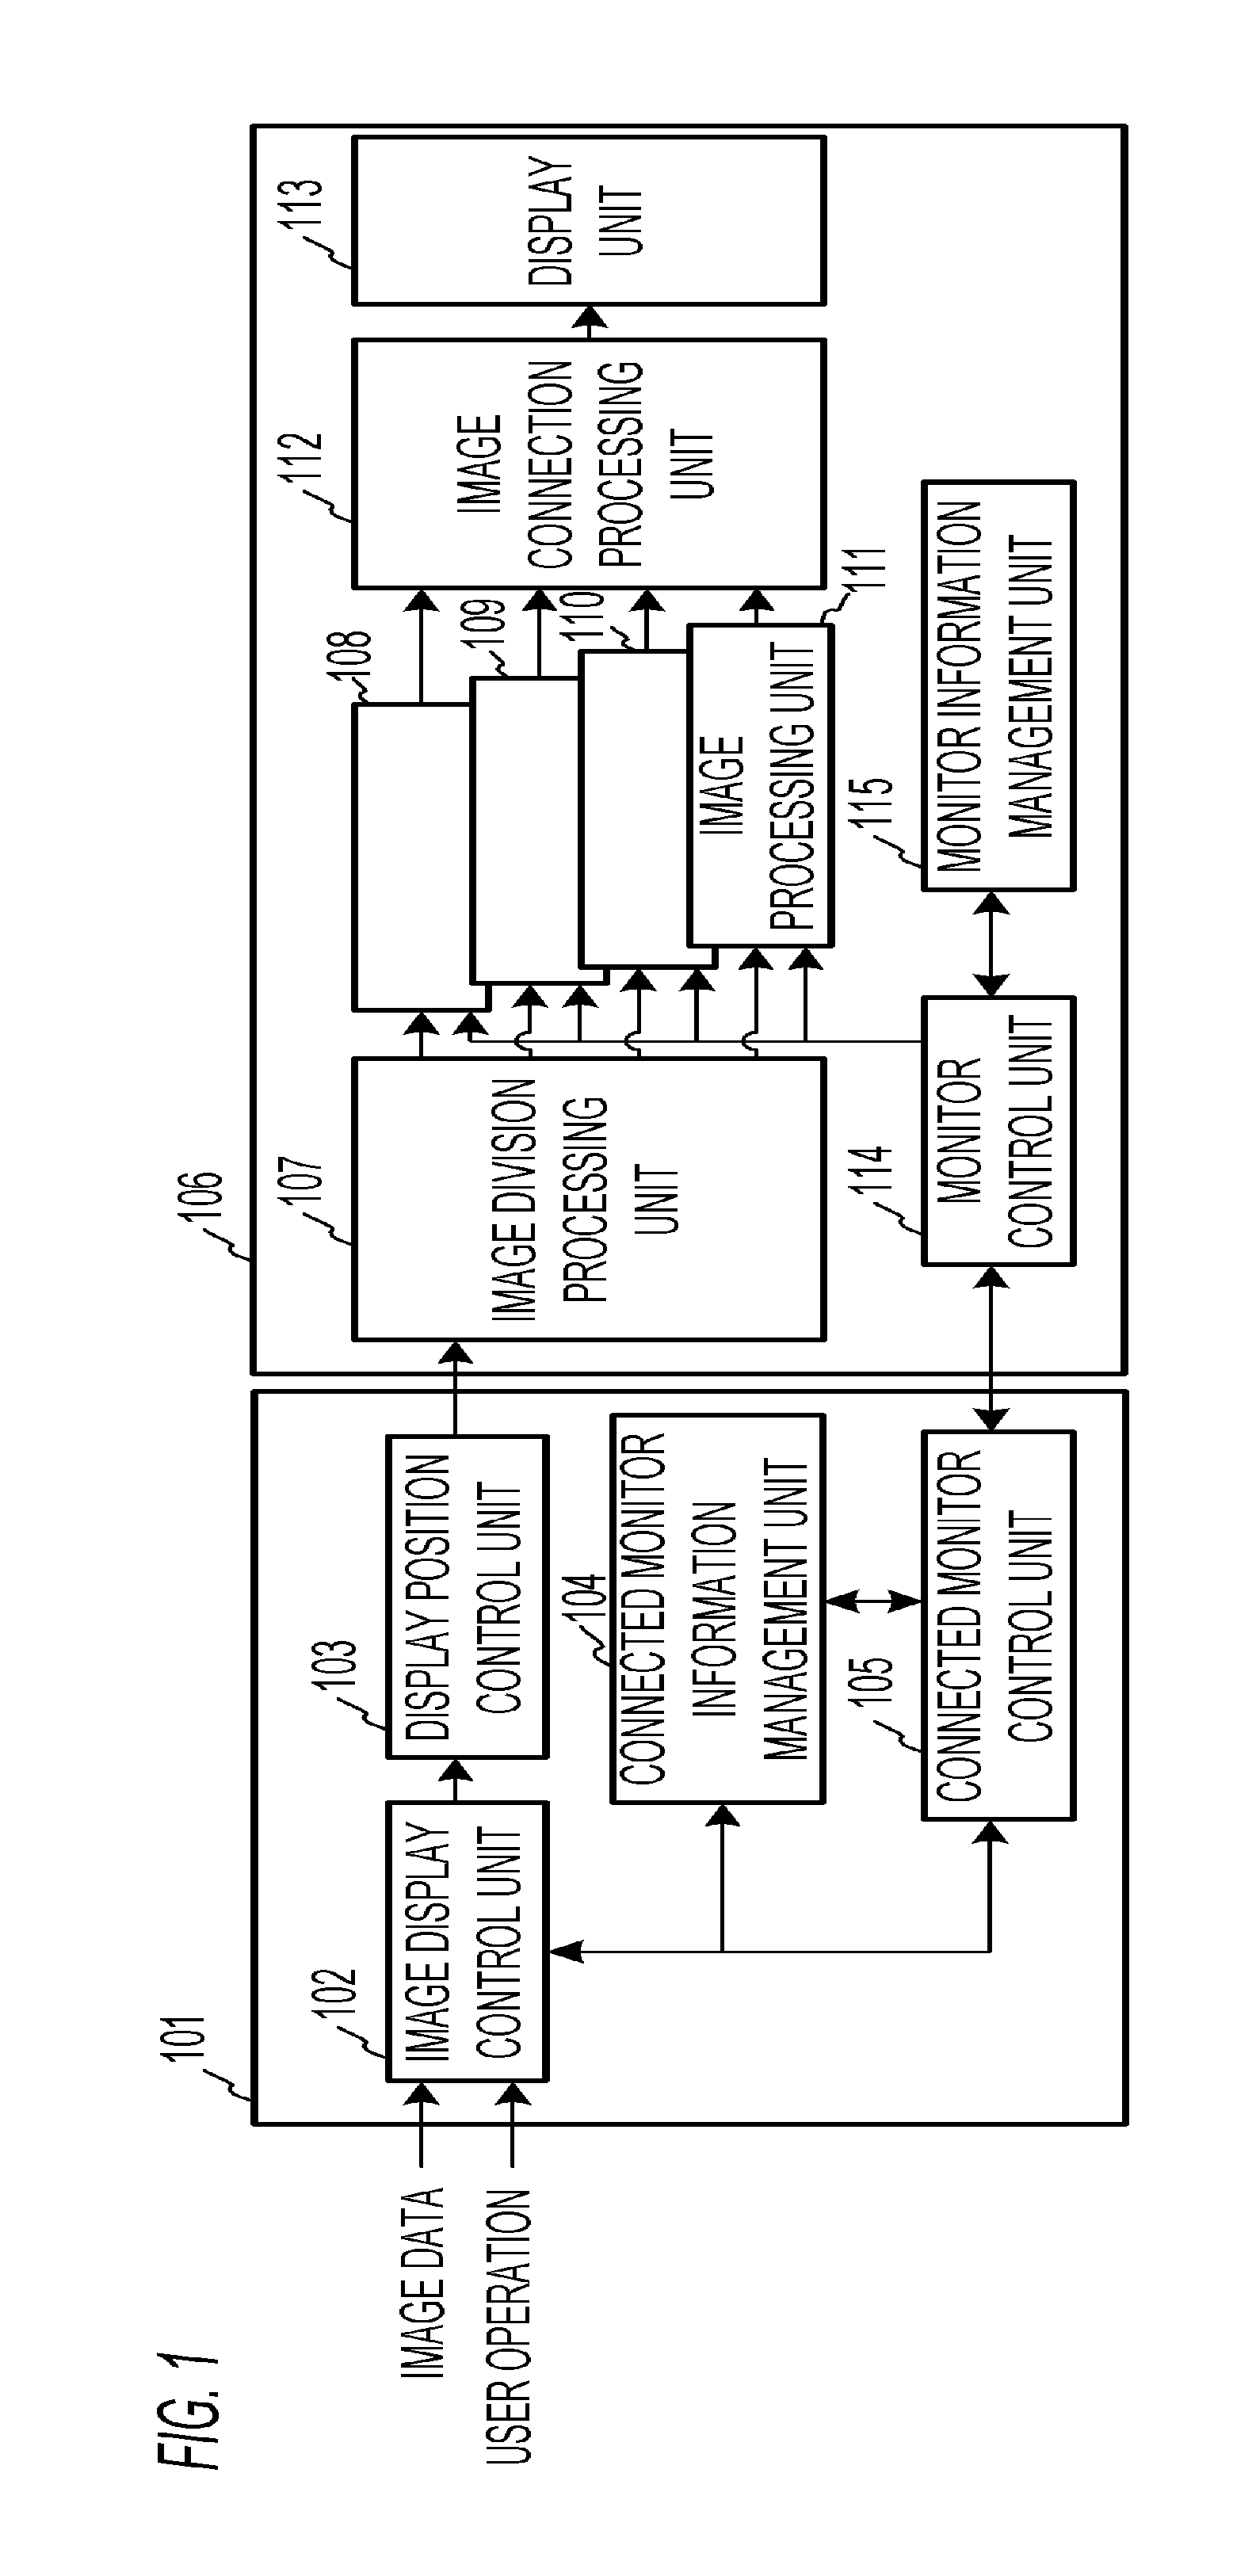 Image output apparatus, control method for image output apparatus, and program